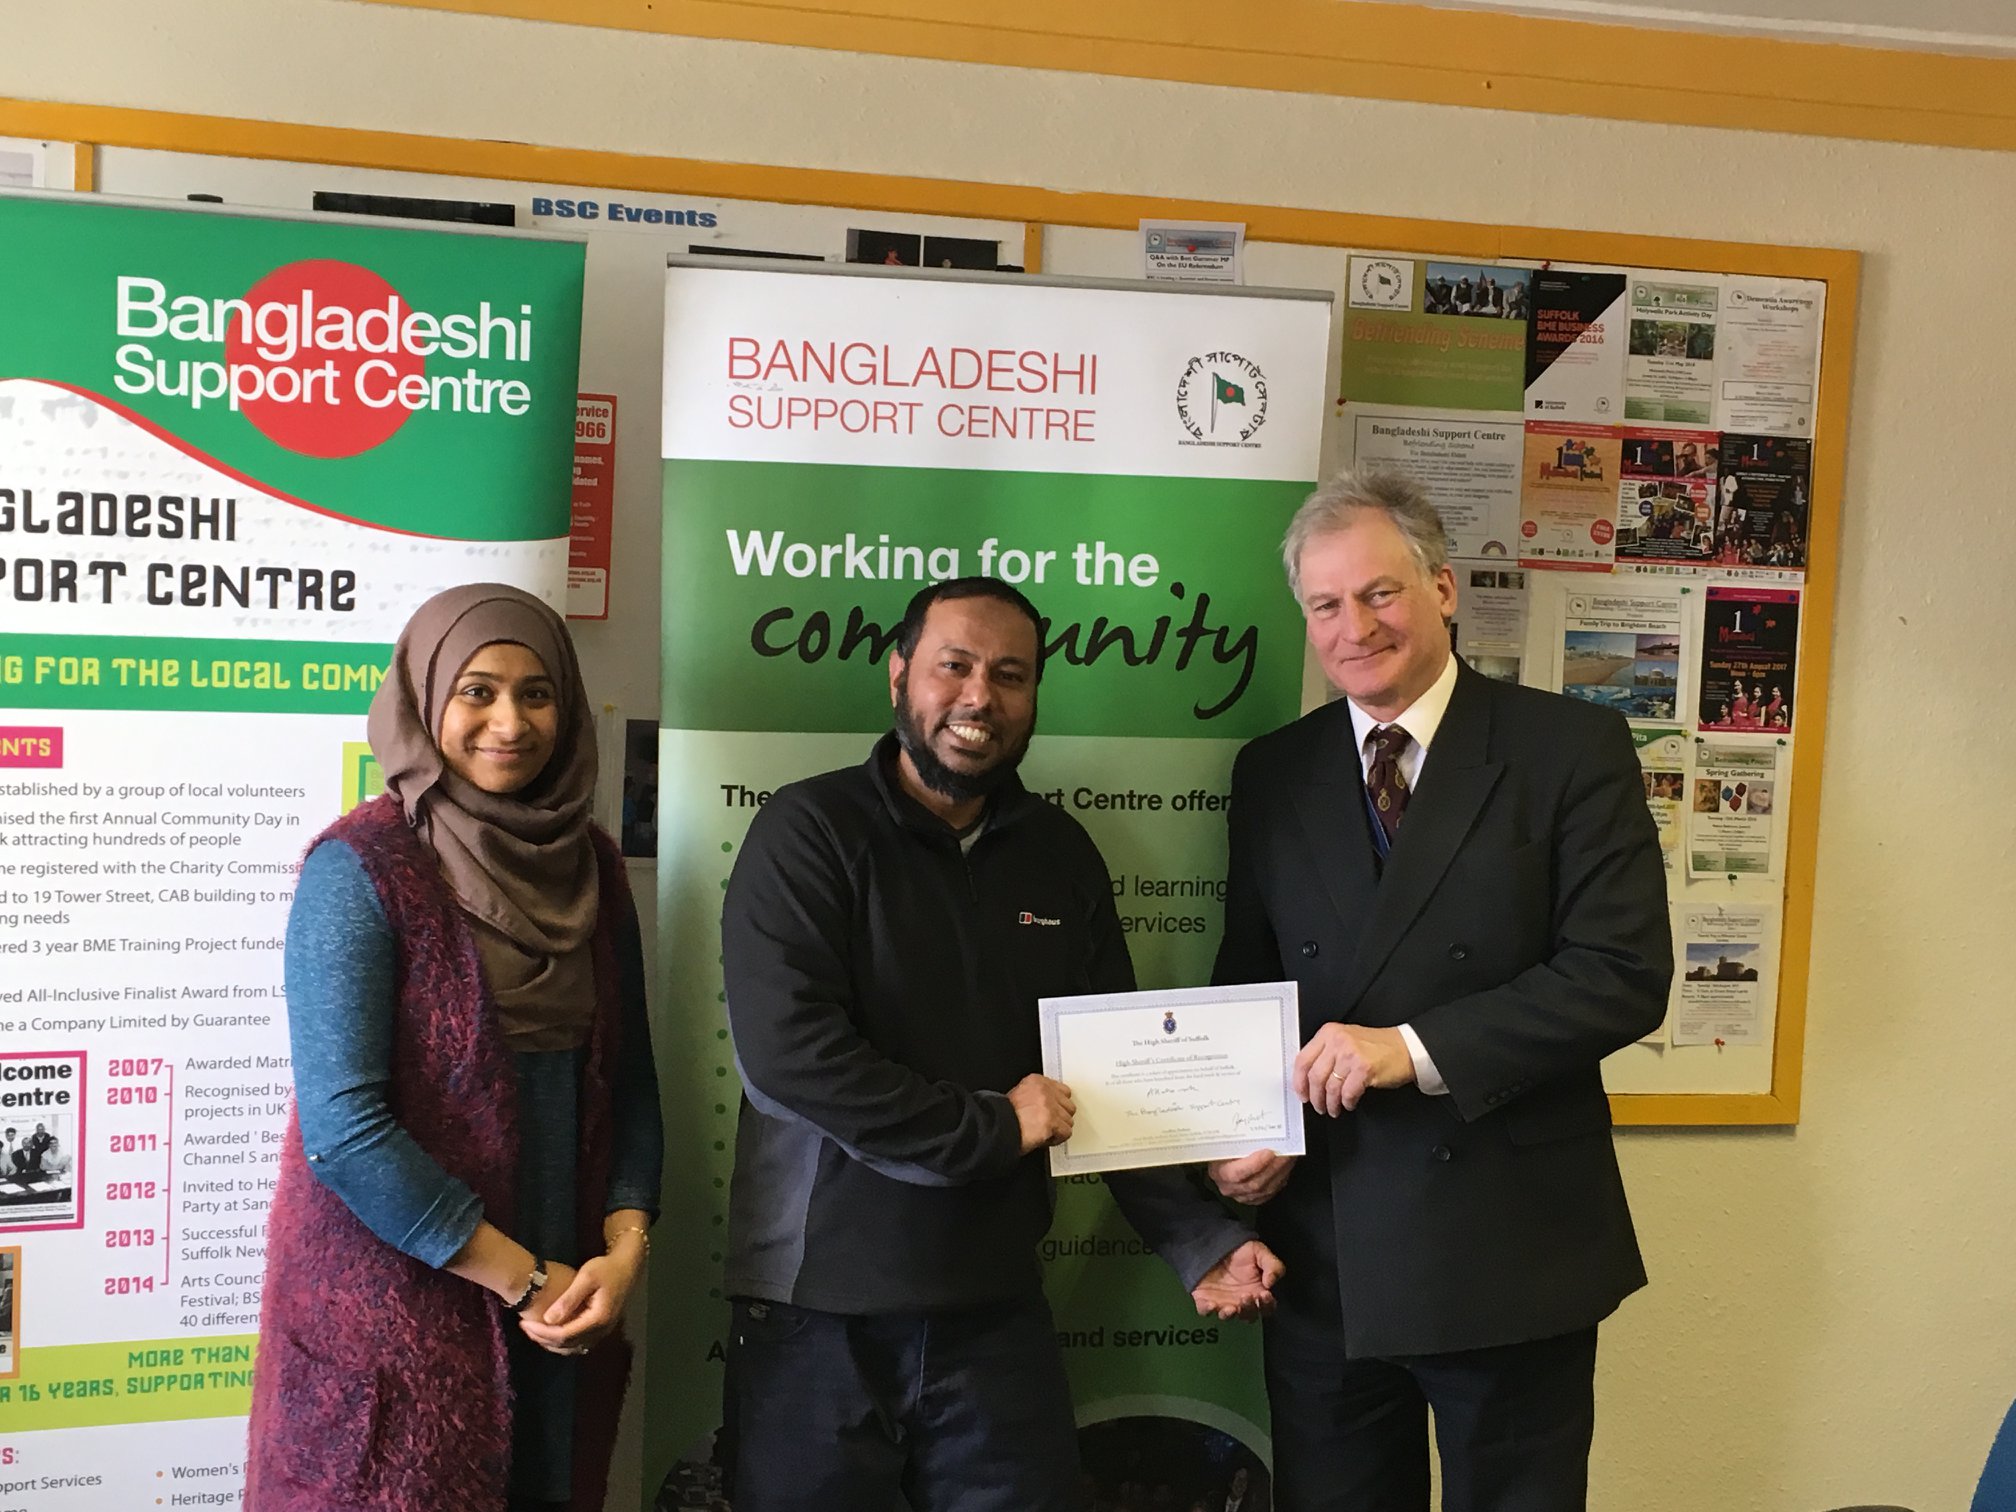 Mohammed and Tina with High Sheriff